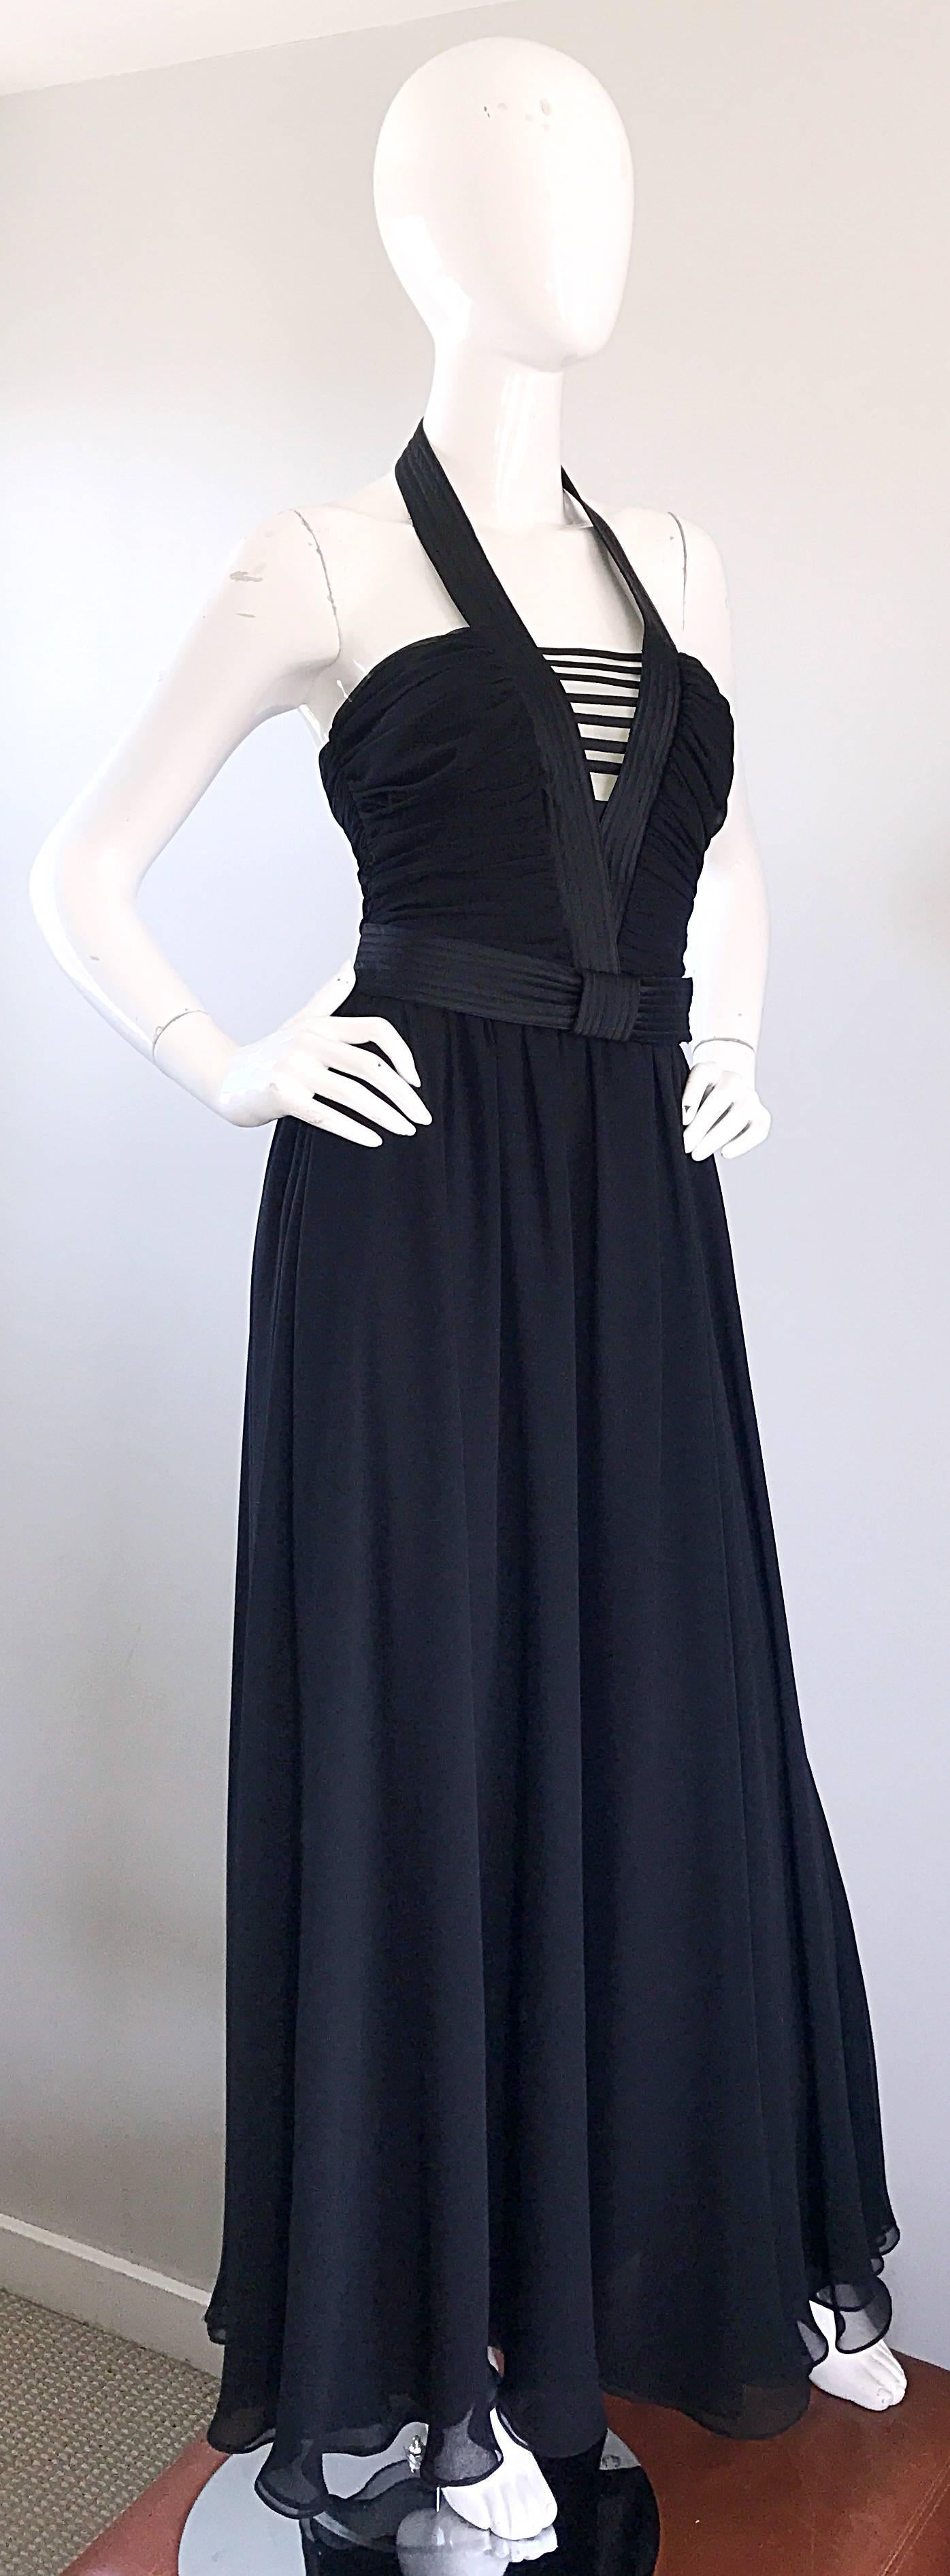 Women's 1970s Frank Usher Black Chiffon Cut - Out Belted 70s Vintage Evening Gown Dress For Sale